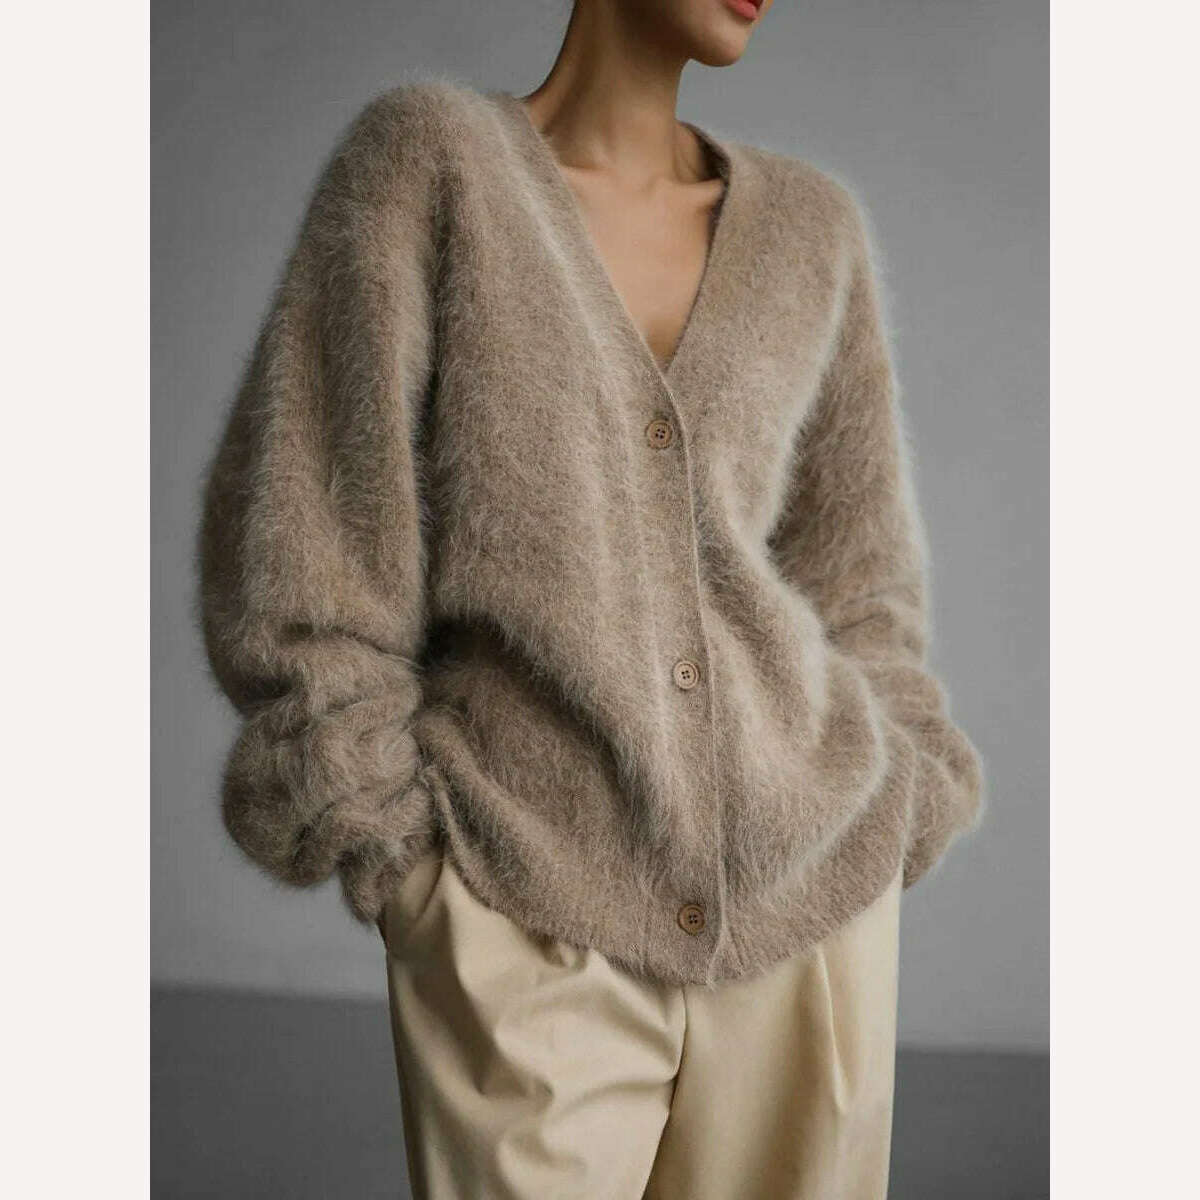 KIMLUD, Fluffy Mohair Cardigan For Women V-Neck Button Up Oversize Cardigan Sweater Autumn Winter Warm Knitted Outerwear, Khaki / S, KIMLUD Women's Clothes